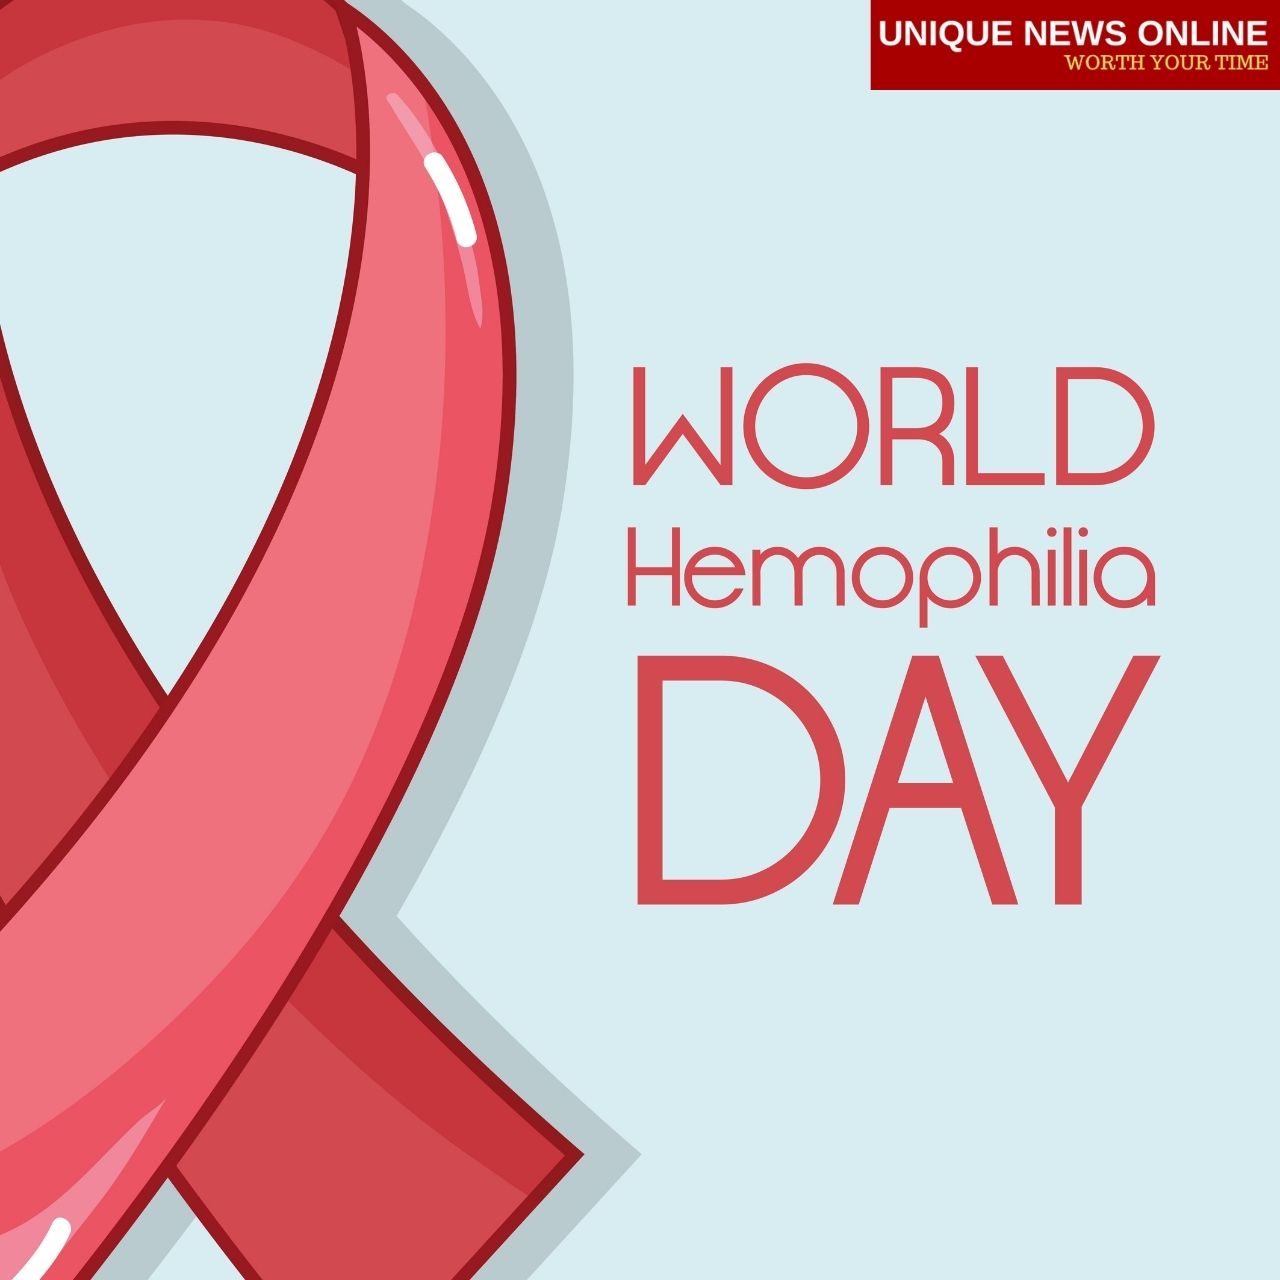 World Hemophilia Day 2021 Wishes, Messages, Greetings, Quotes, and Images